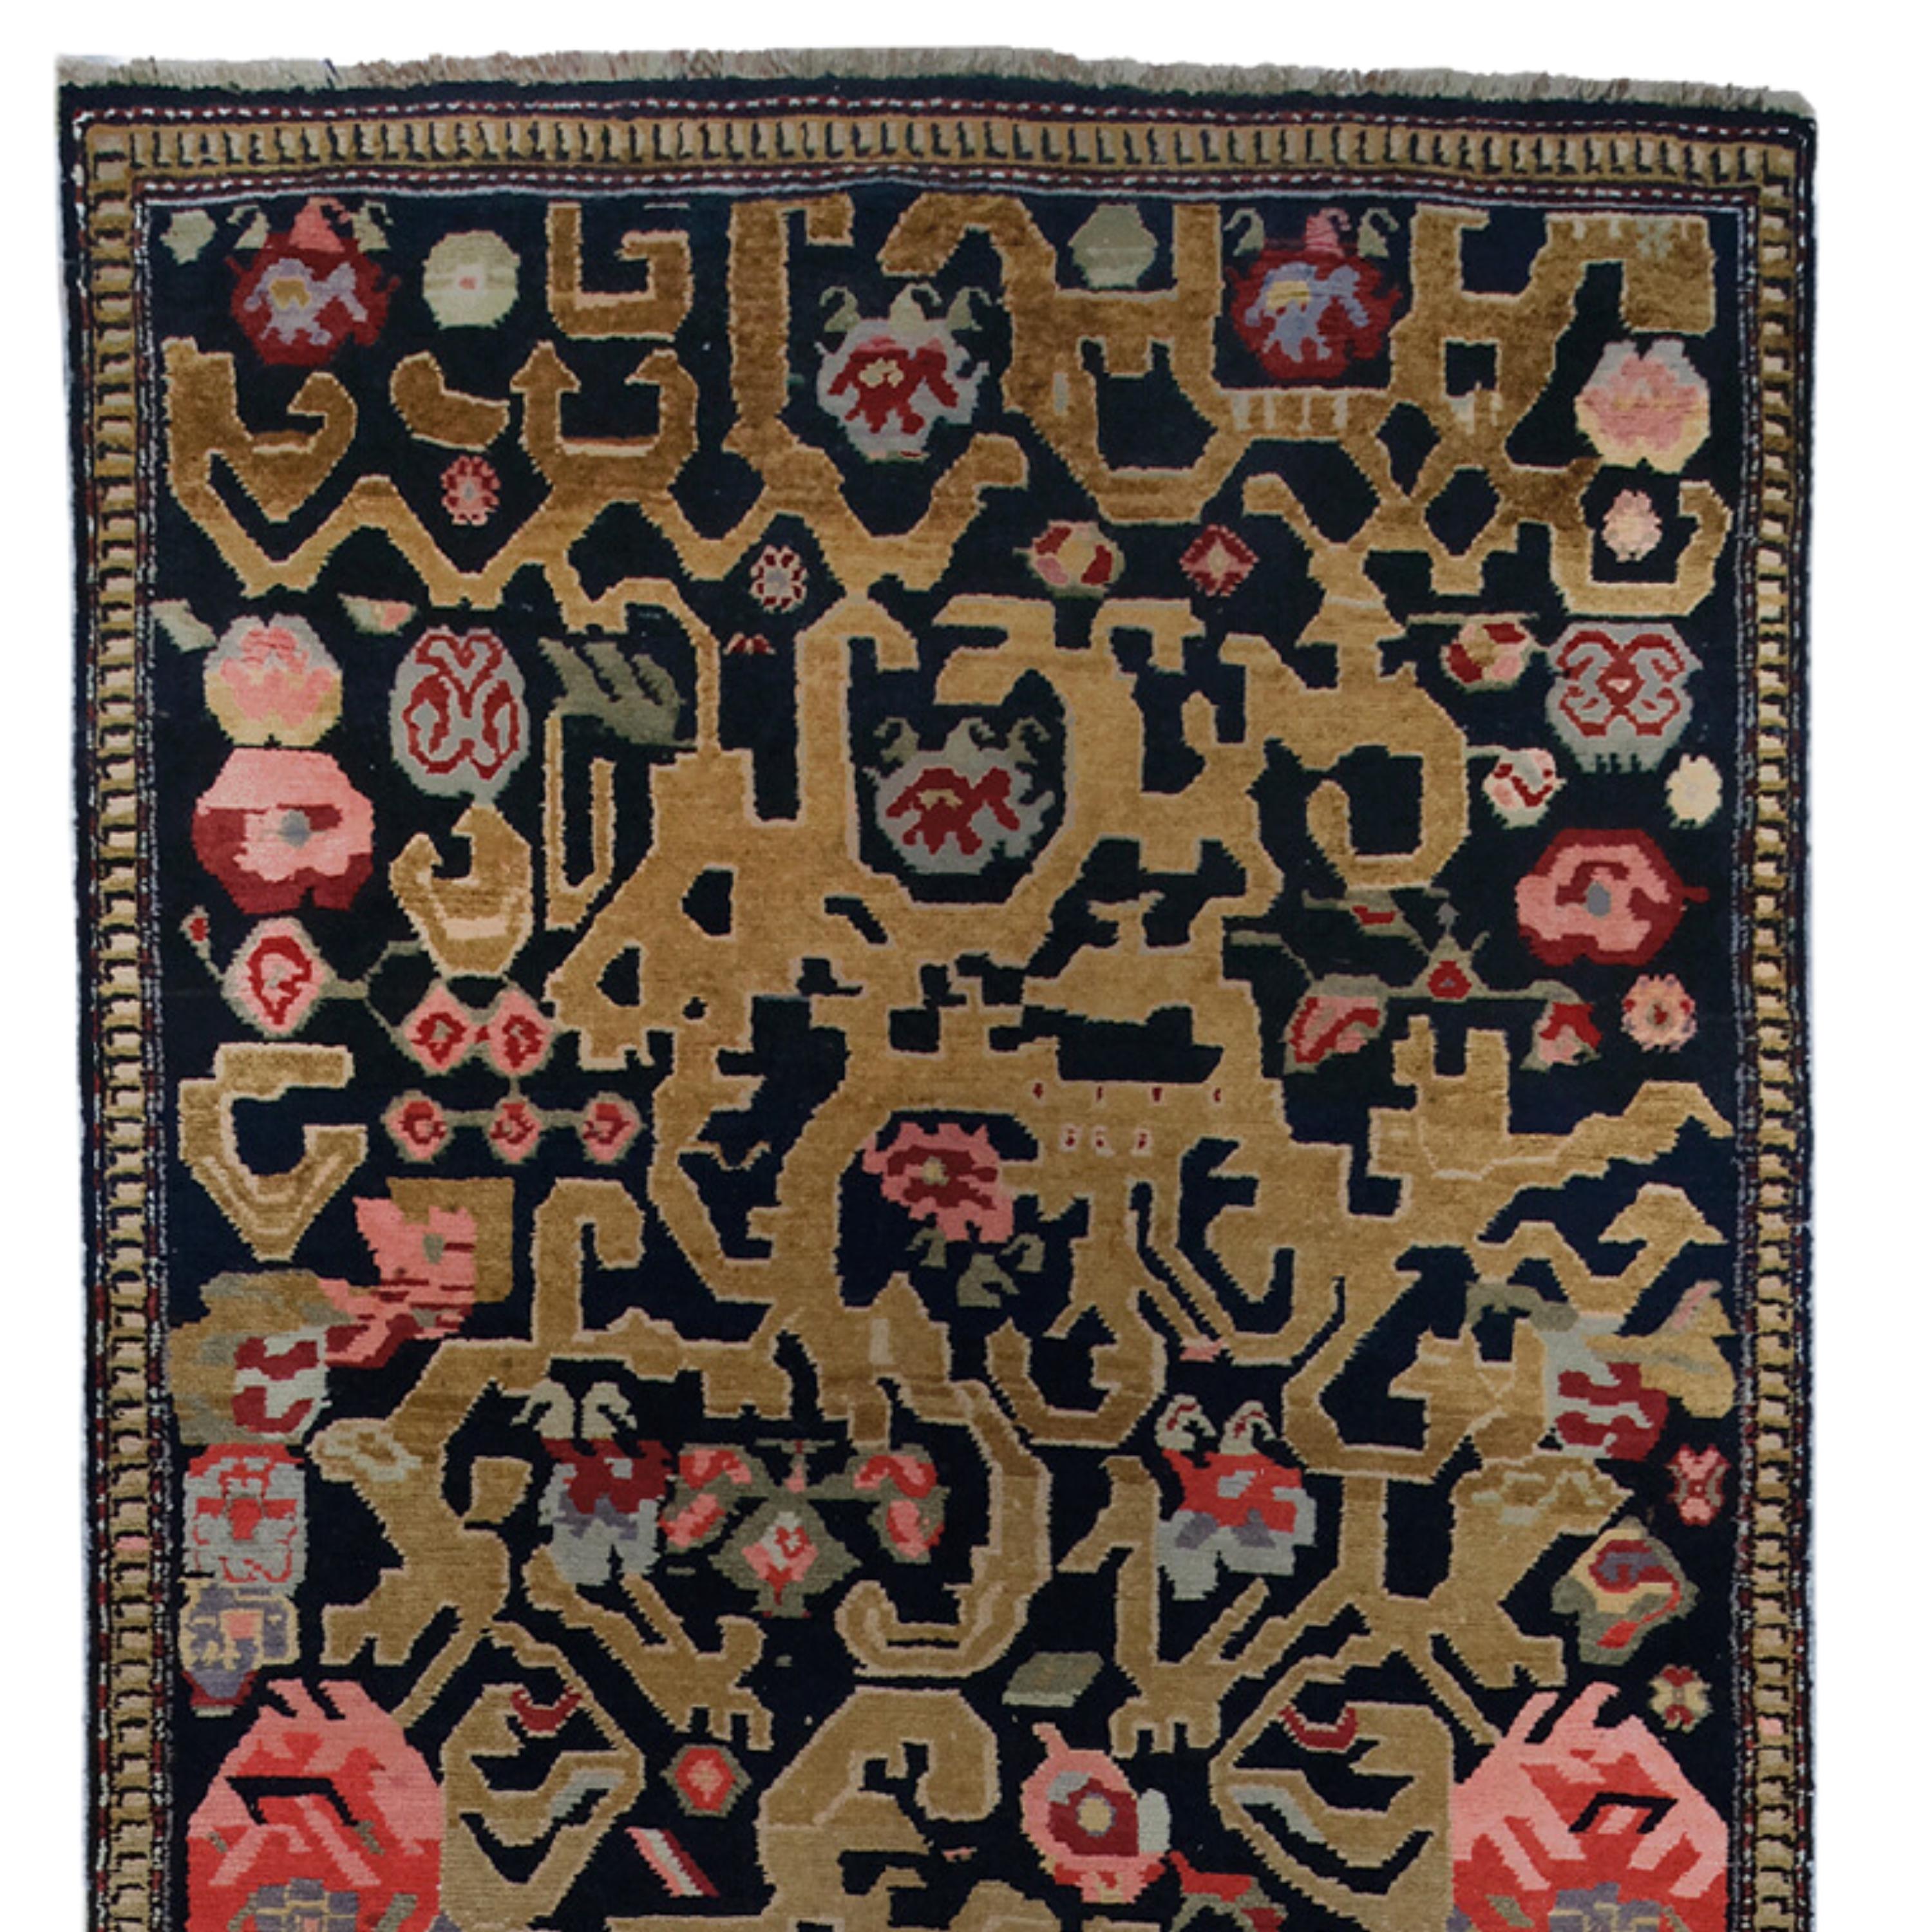 A Historical Artifact: 19th Century Caucasian Karabakh Road

If you want to add a historical and cultural artifact to your home, this antique runner is for you. This runner is a Caucasian-Karabakh runner from the 19th century. Karabakh is one of the